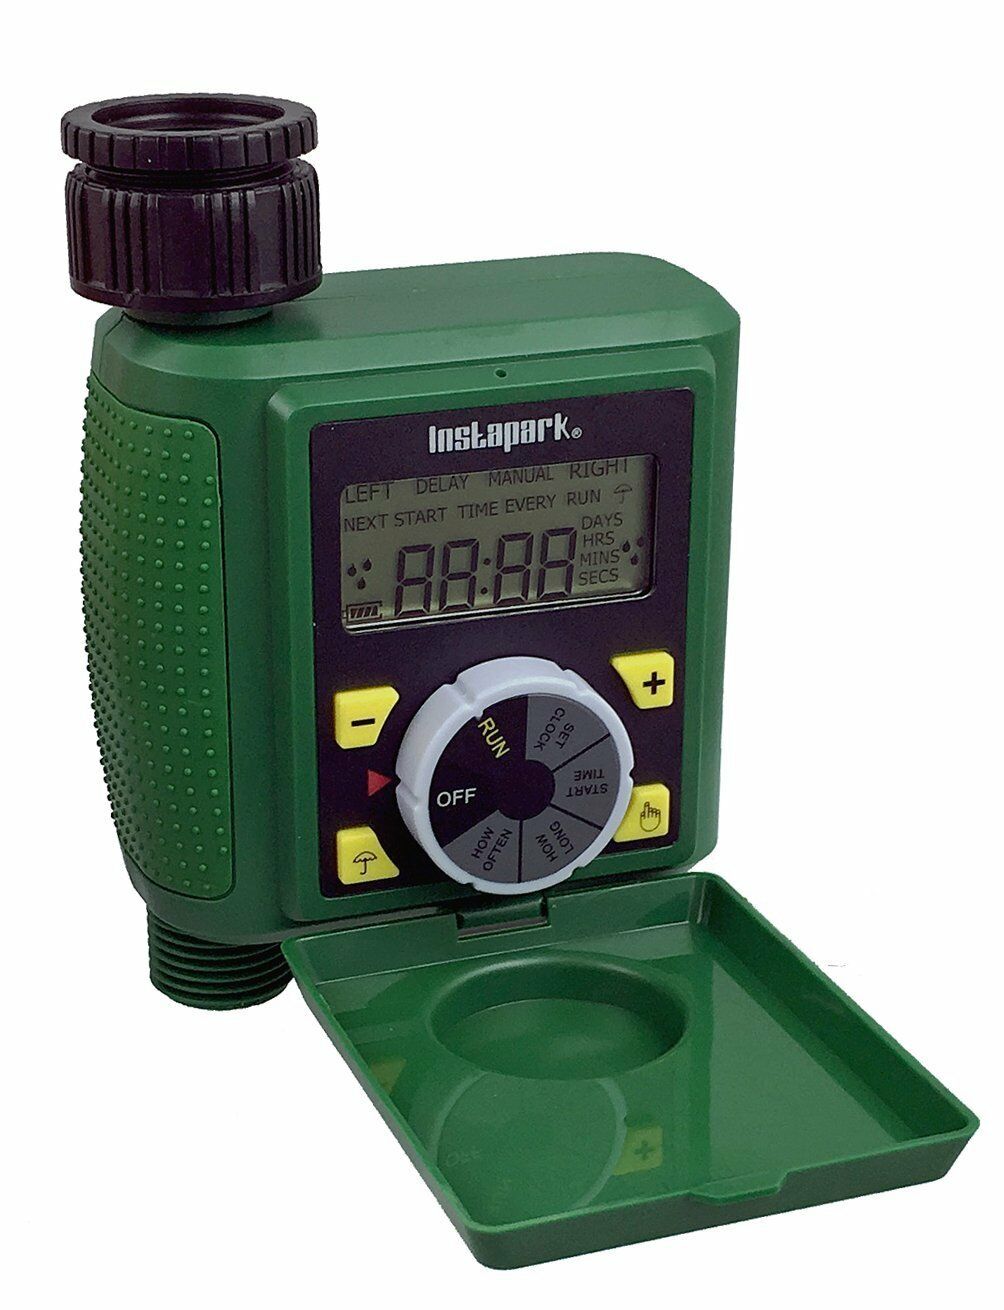 Digital Water Programmable Auto On Off Timer With Rain Delay + Manual Control 07